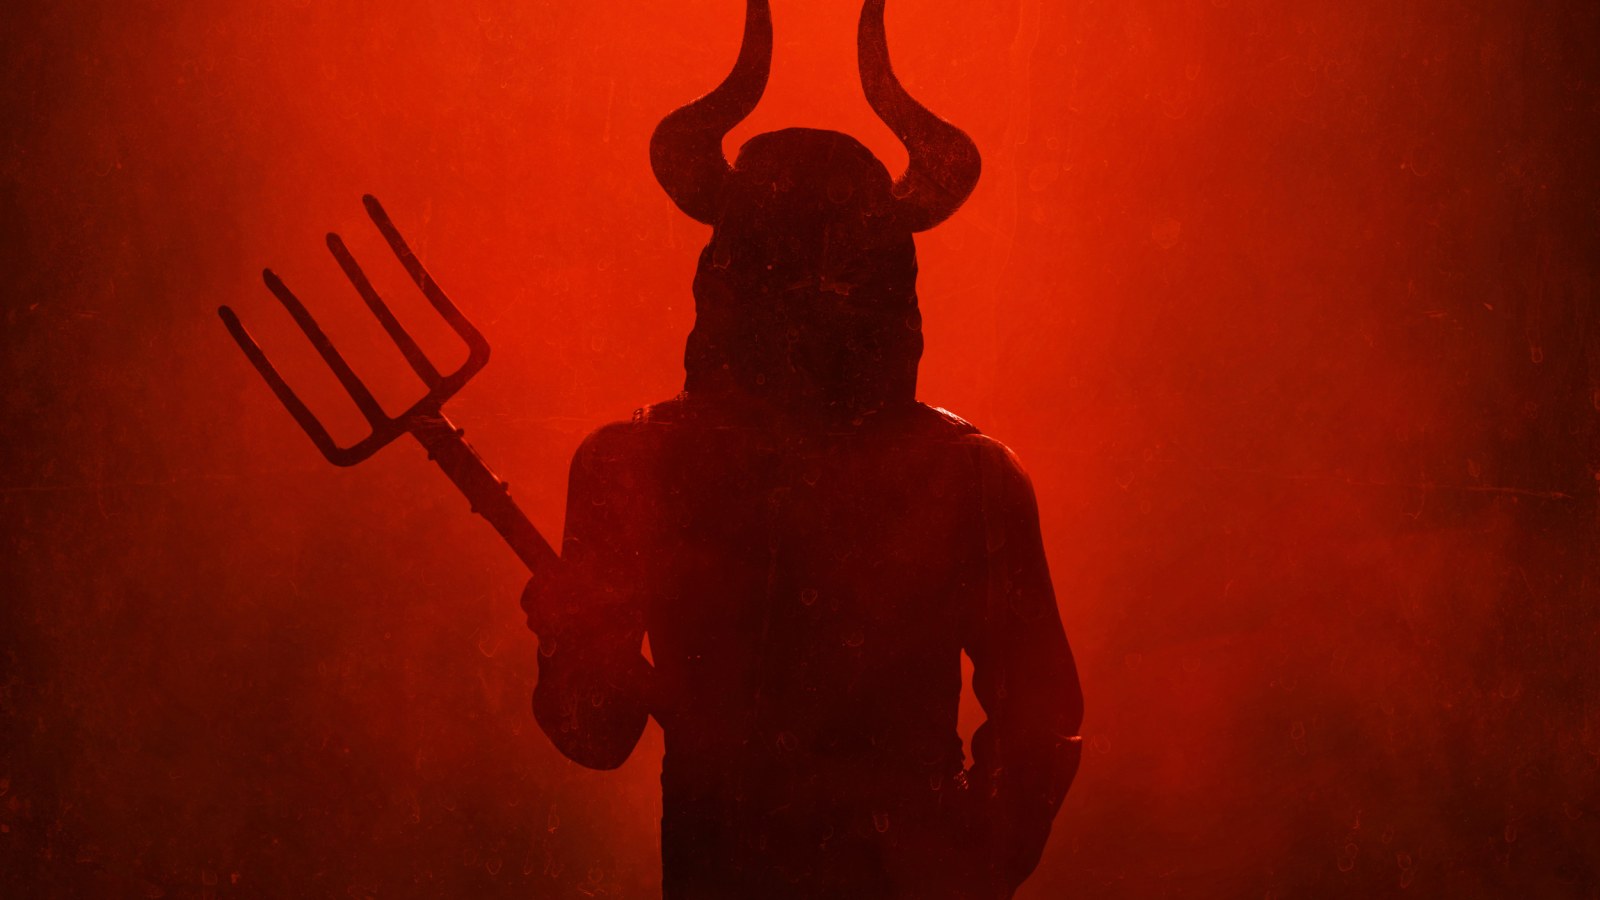 What Is Satanic Panic? Debunked '80s Conspiracy Theory Is Making a Return